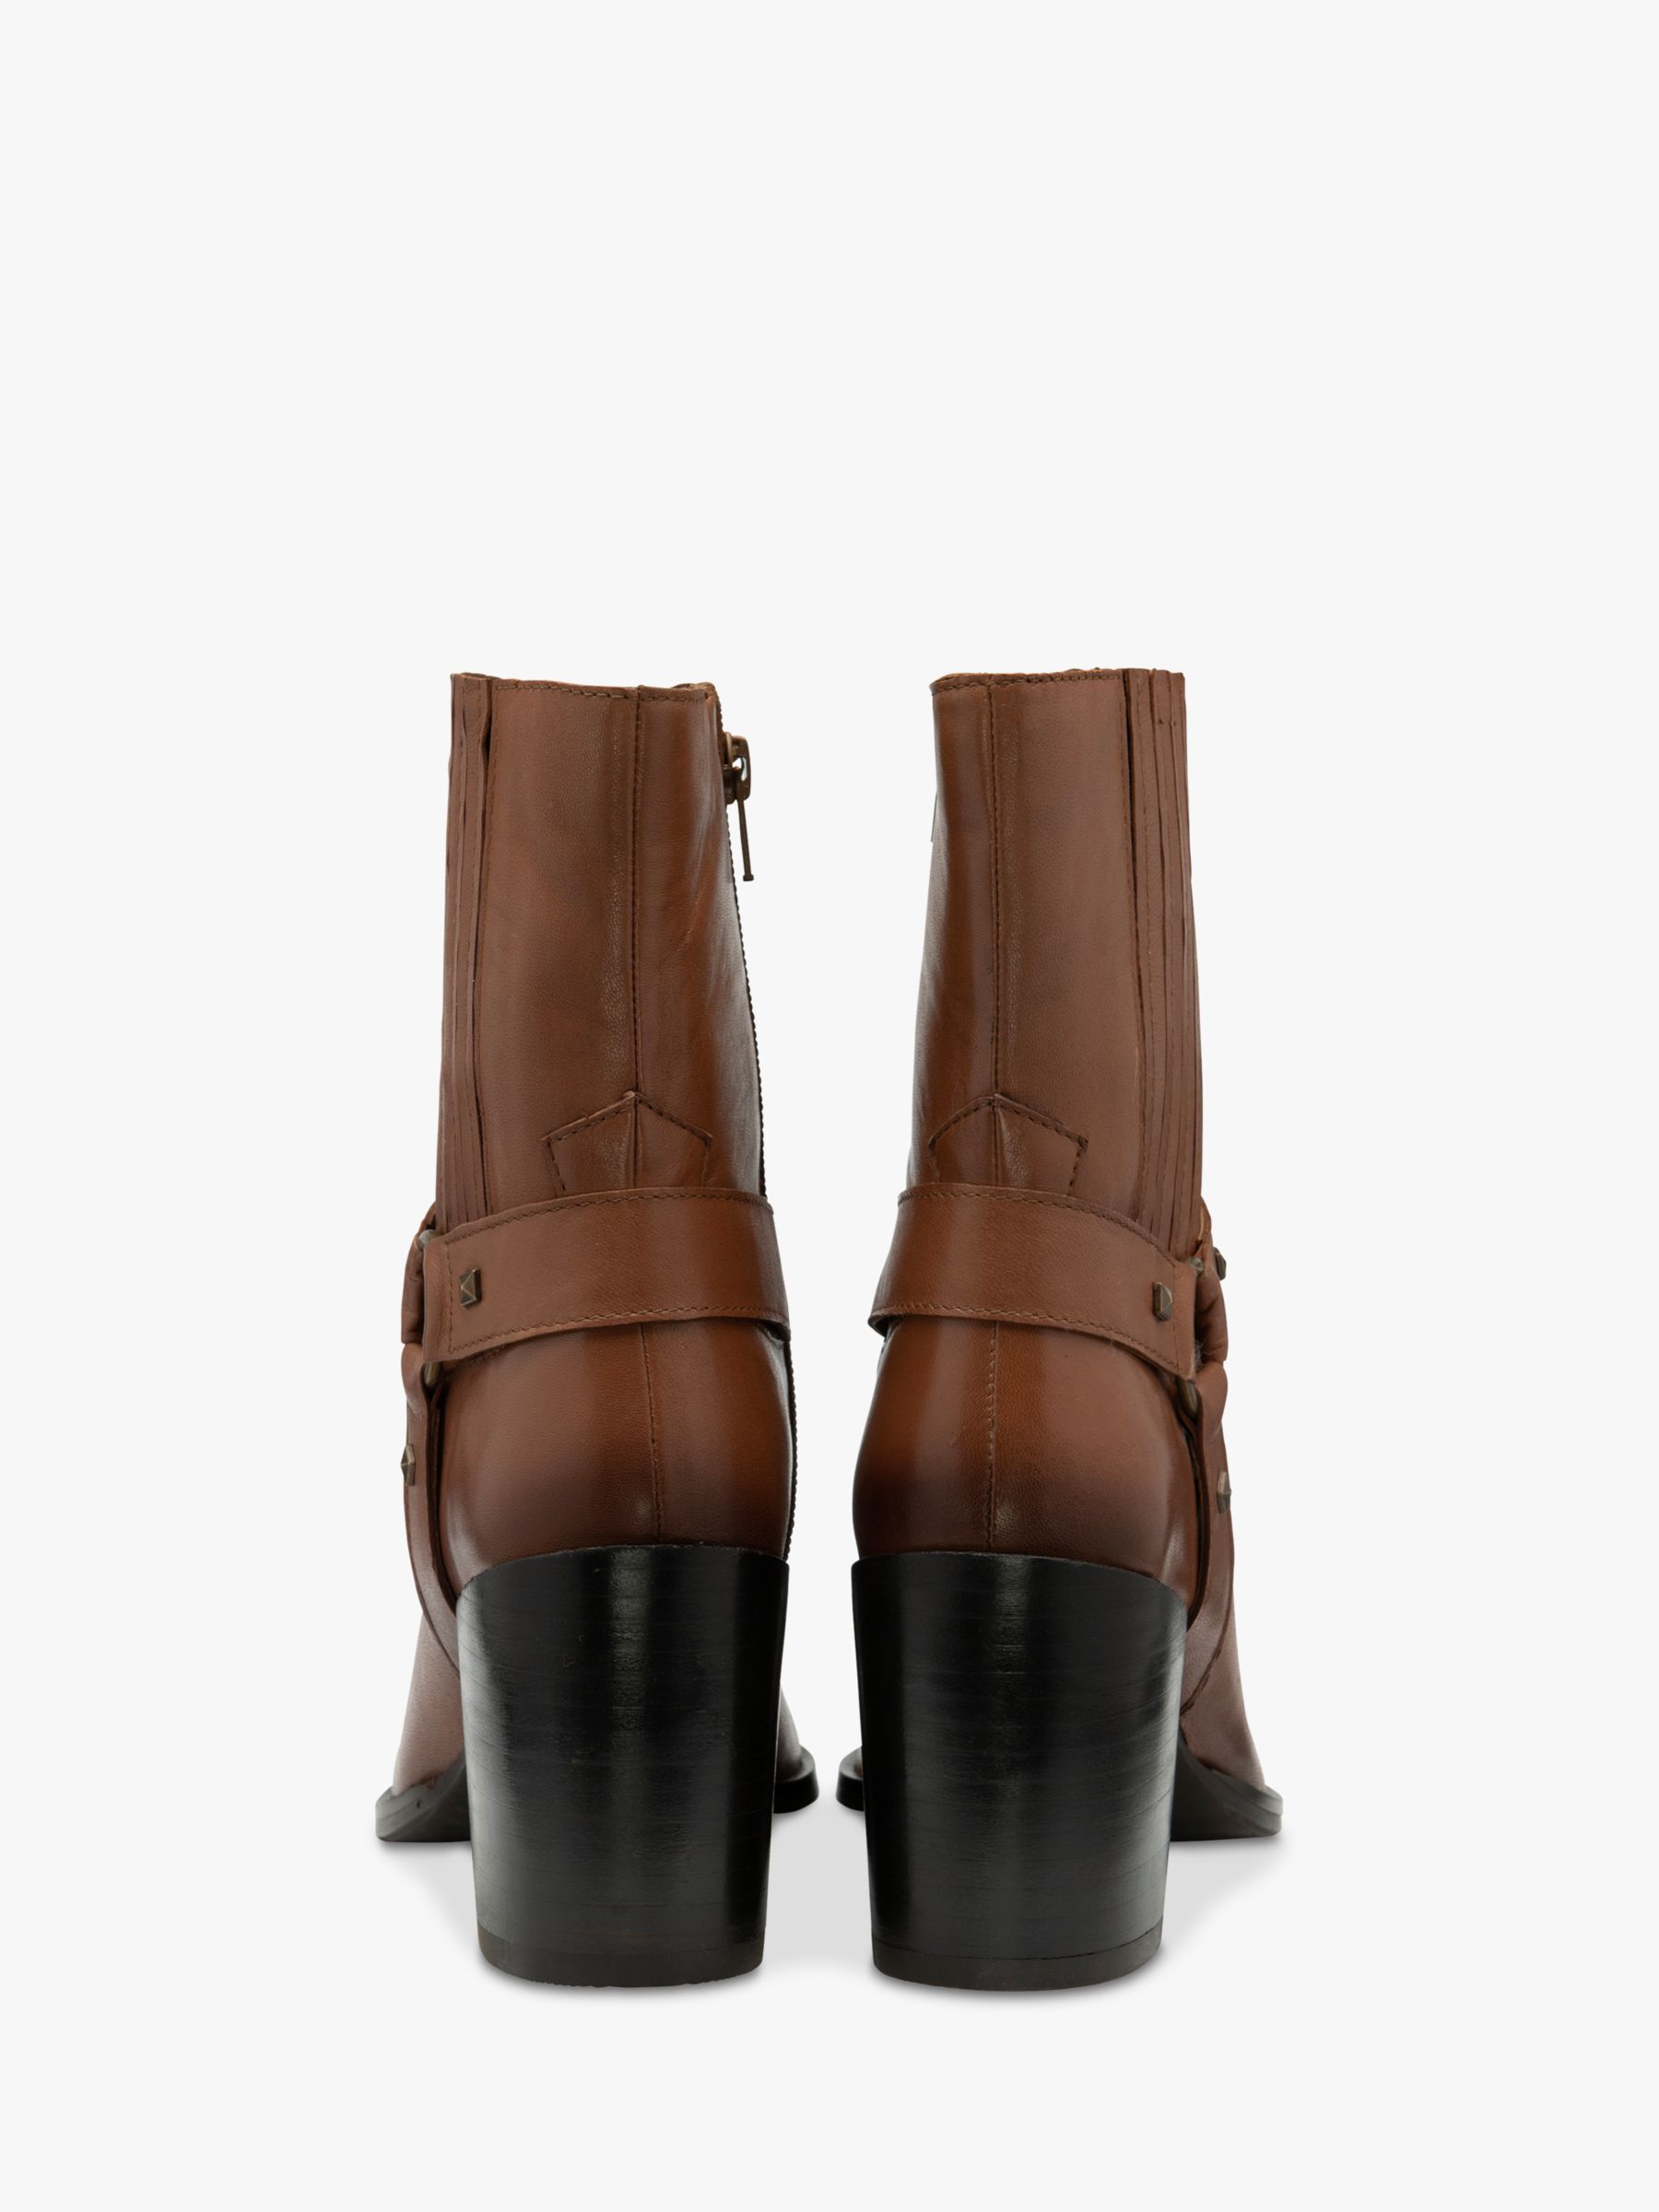 Ravel Ohey Black Leather Ankle Boots, Tan at John Lewis & Partners